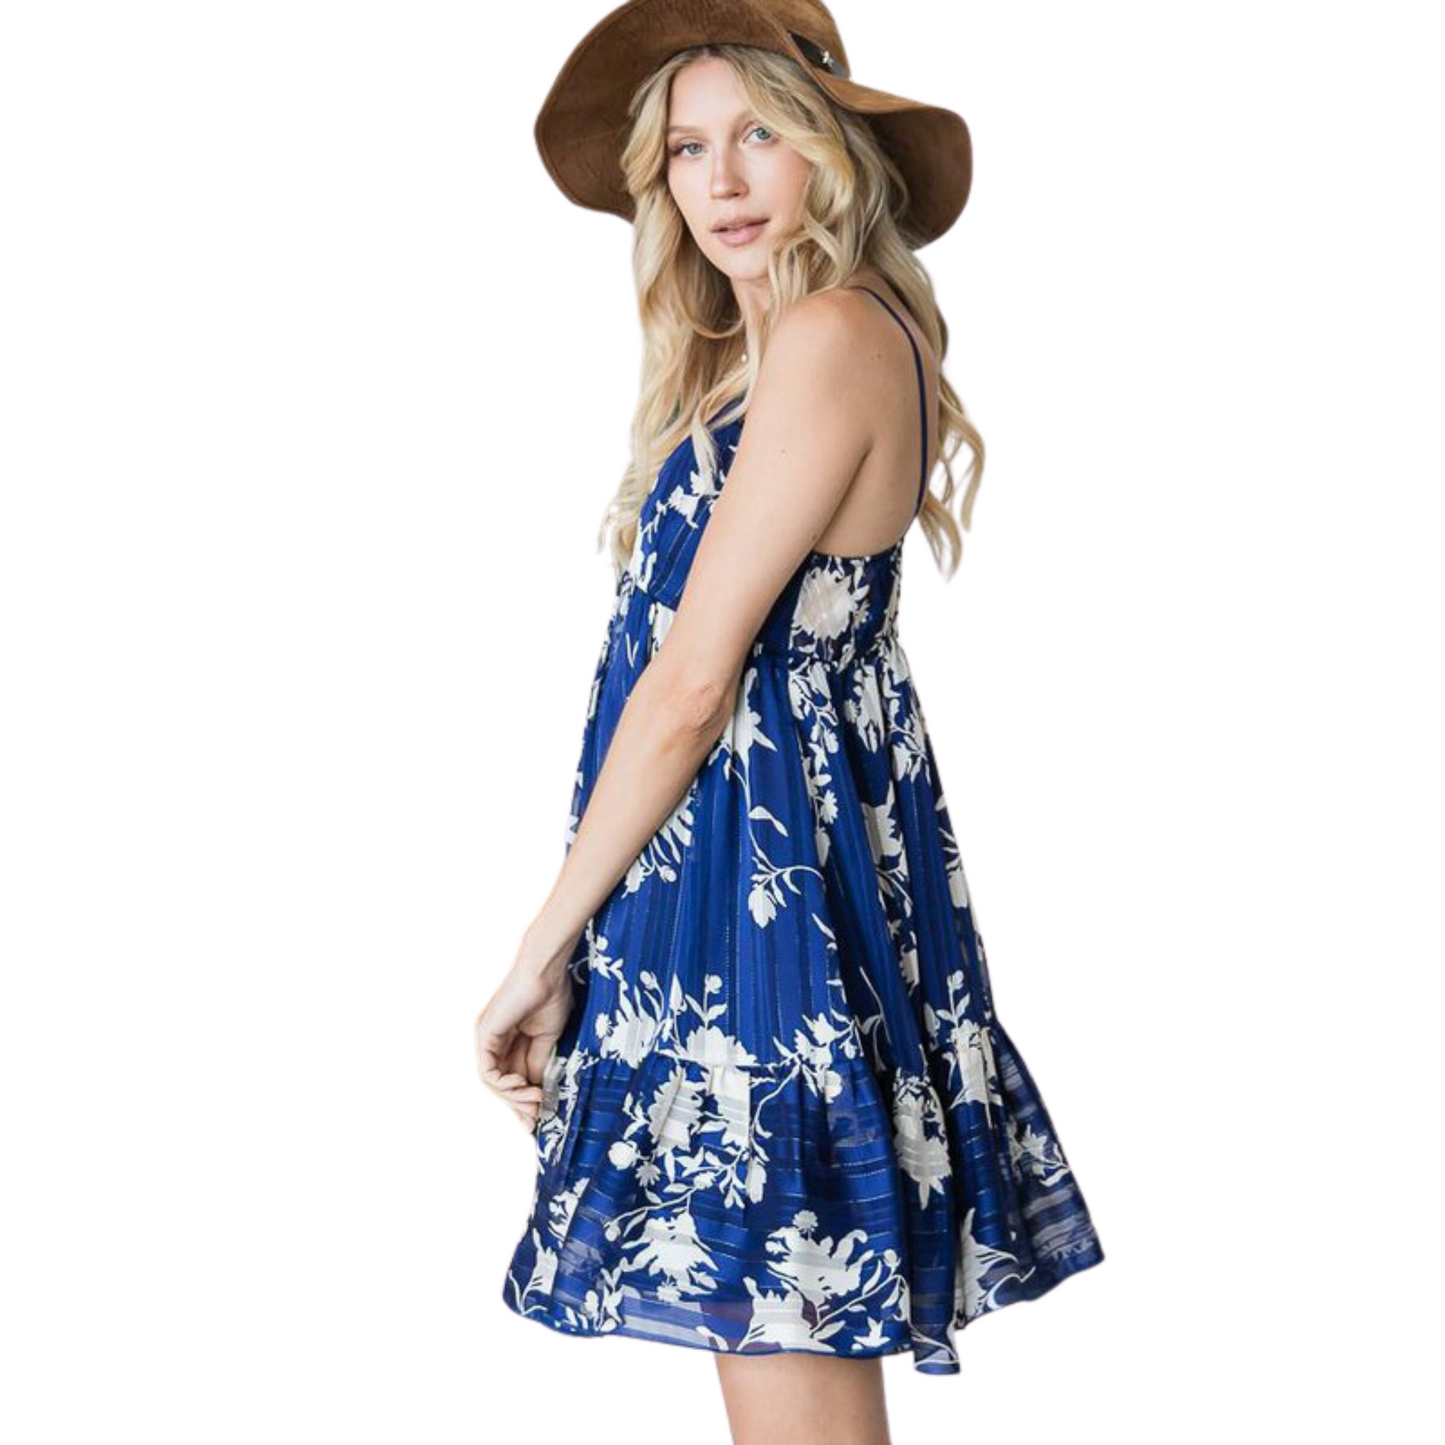 This Floral Chiffon Empire Dress will have you looking your best. It features a spaghetti strap and mini dress cut in a bold blue color. Perfect for any formal occasions, its stylish design will let you stand out in the crowd.